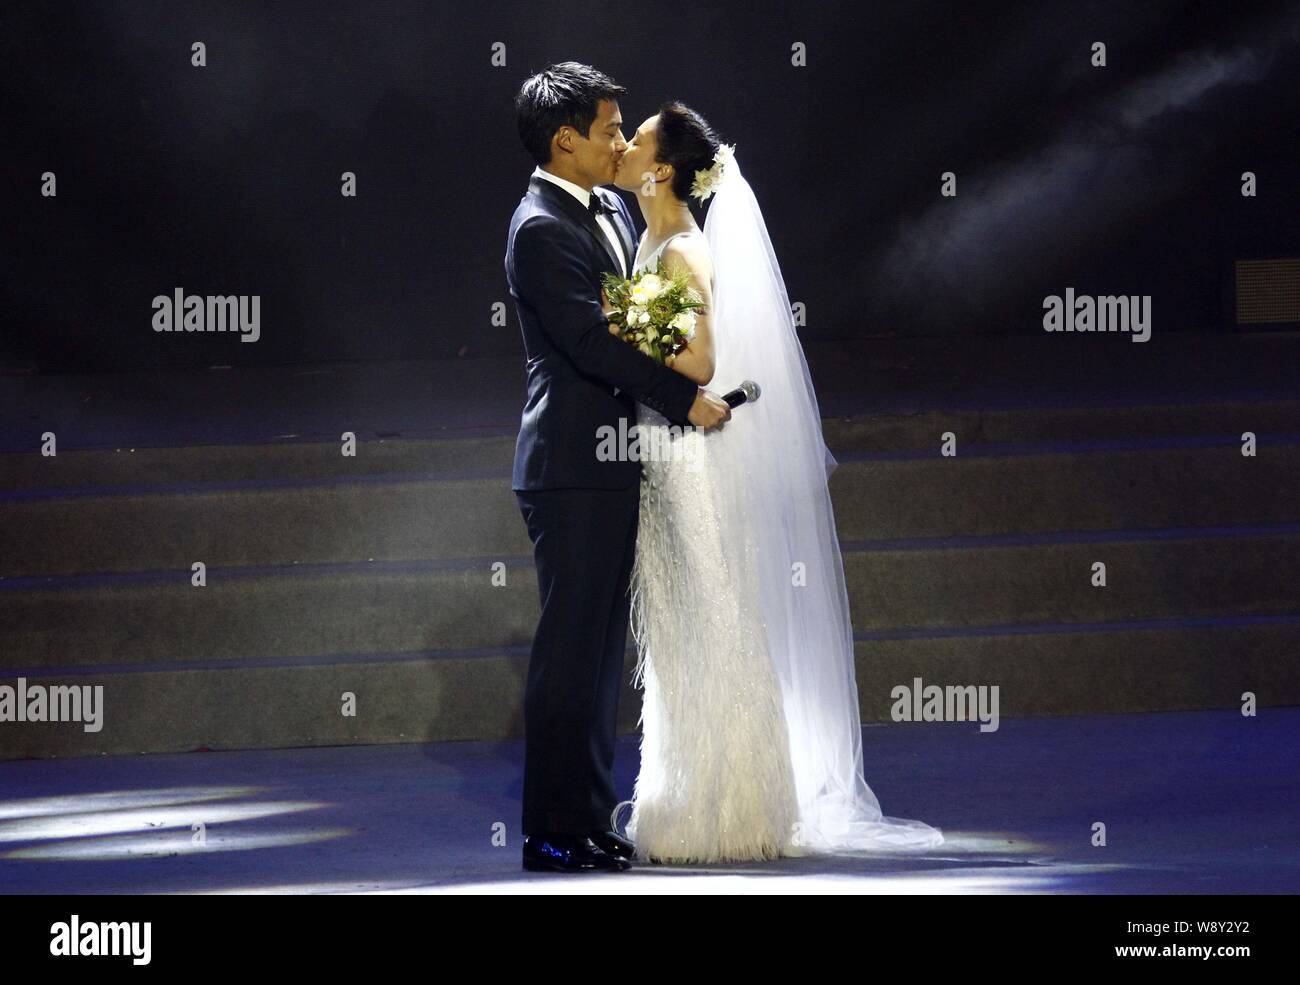 American actor Archie Kao, left, and Chinese actress Zhou Xun in a white wedding dress kiss after announcing their wedding during the One Night charit Stock Photo